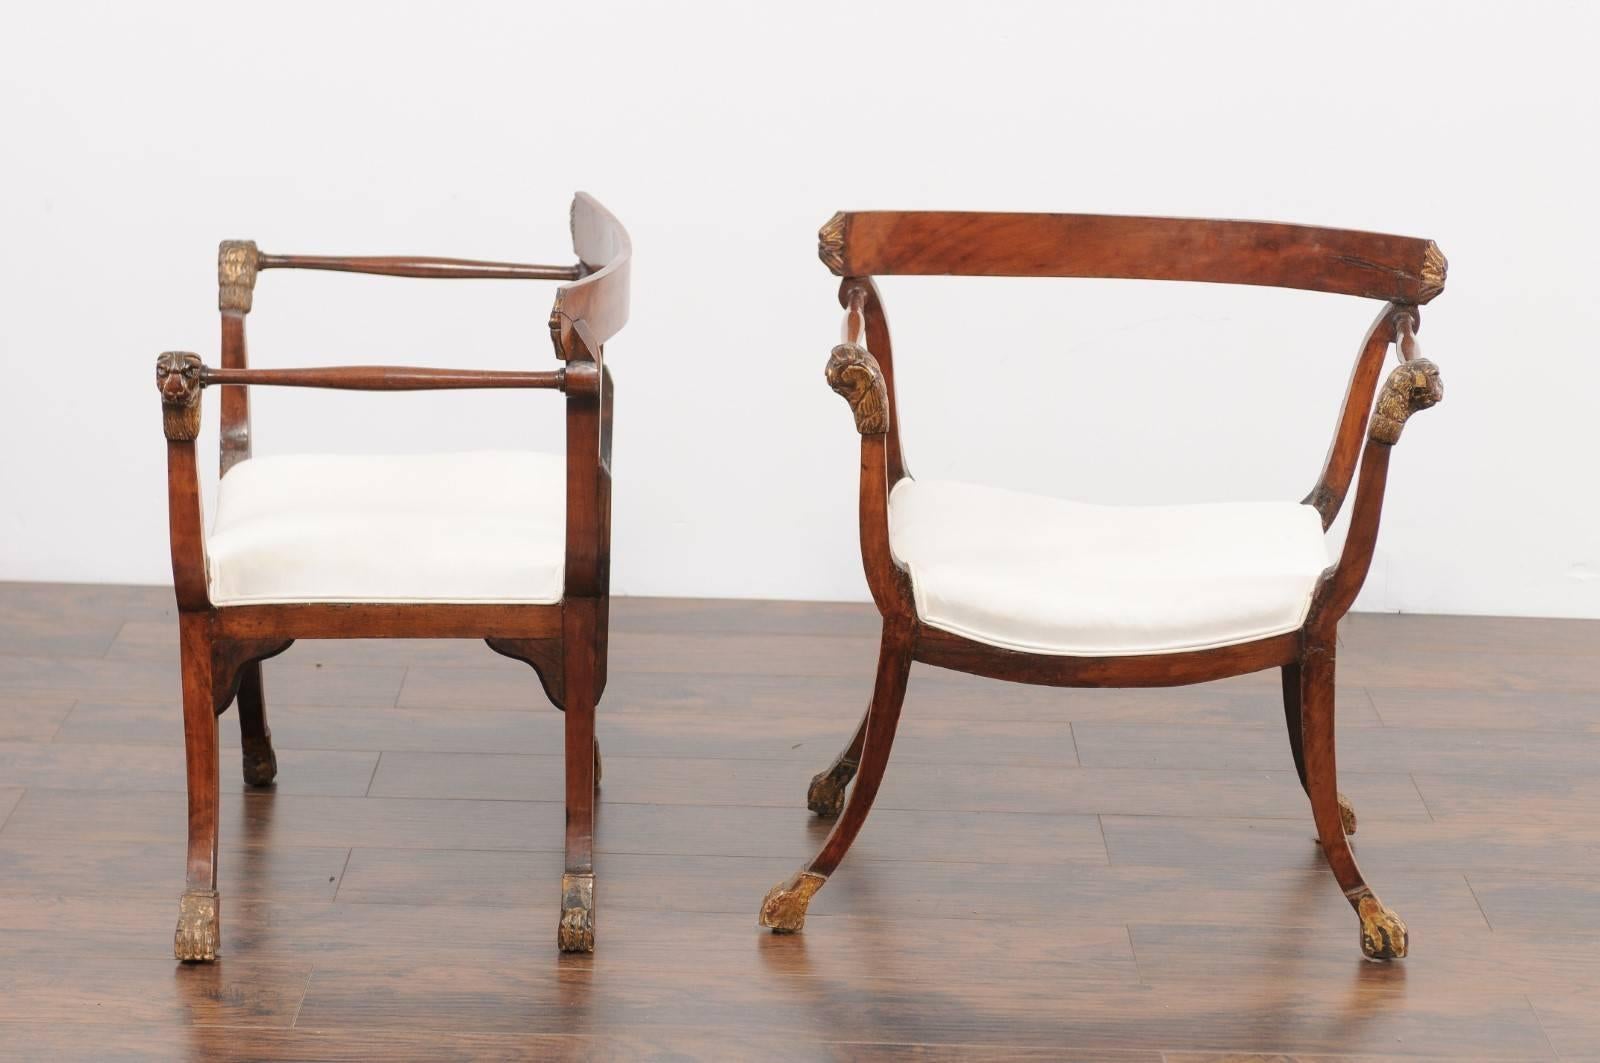 Pair of 18th Century Italian Upholstered Seat Walnut Chairs with Lion Details 2